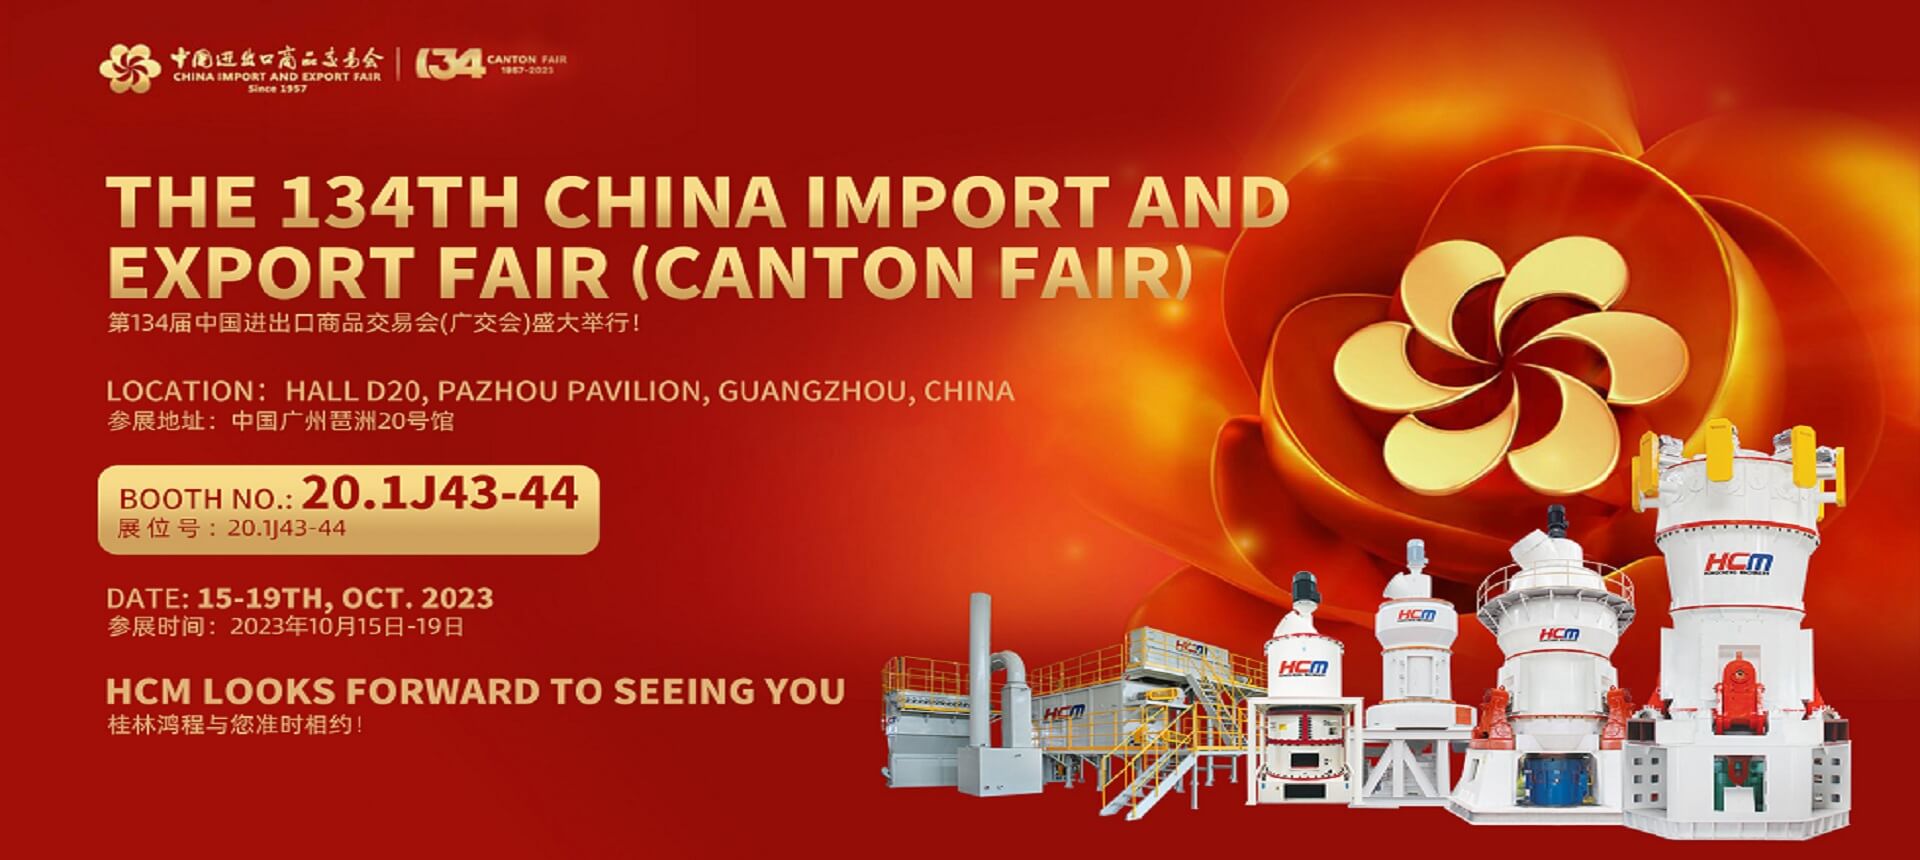 Meet at the 134th Canton Fair on October 15th